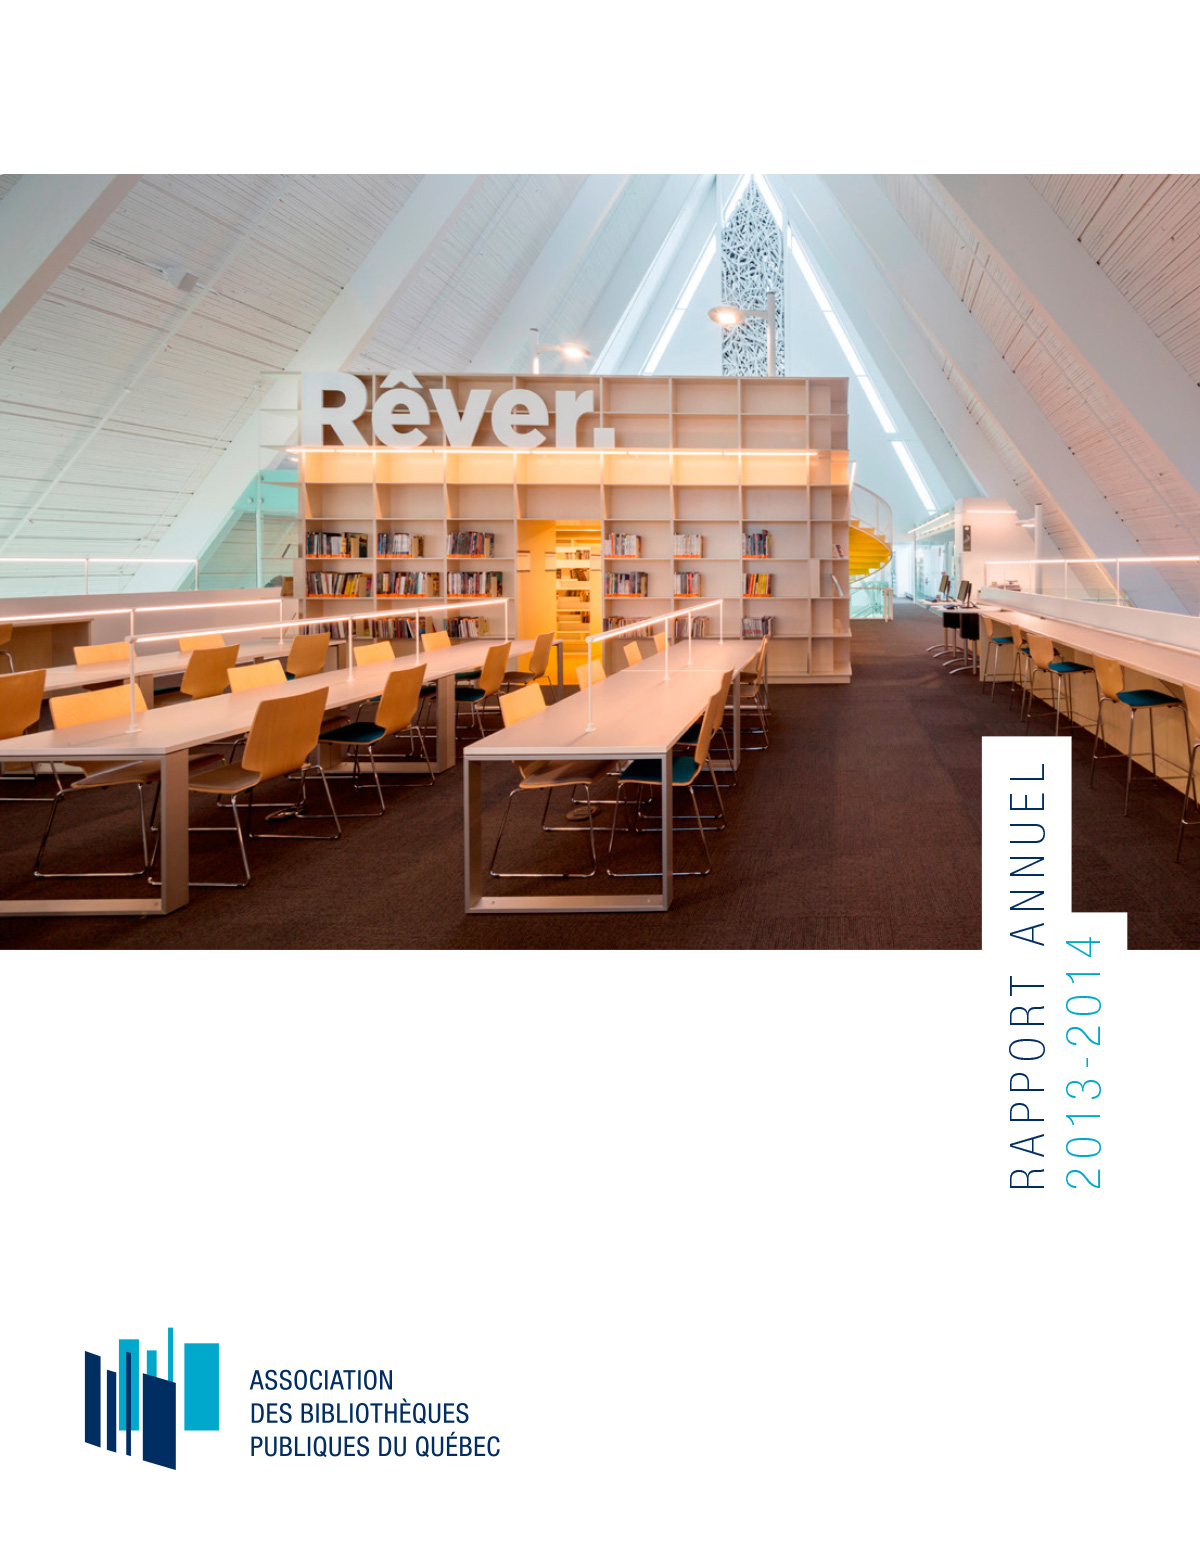 Rapport annuel 2013-2014